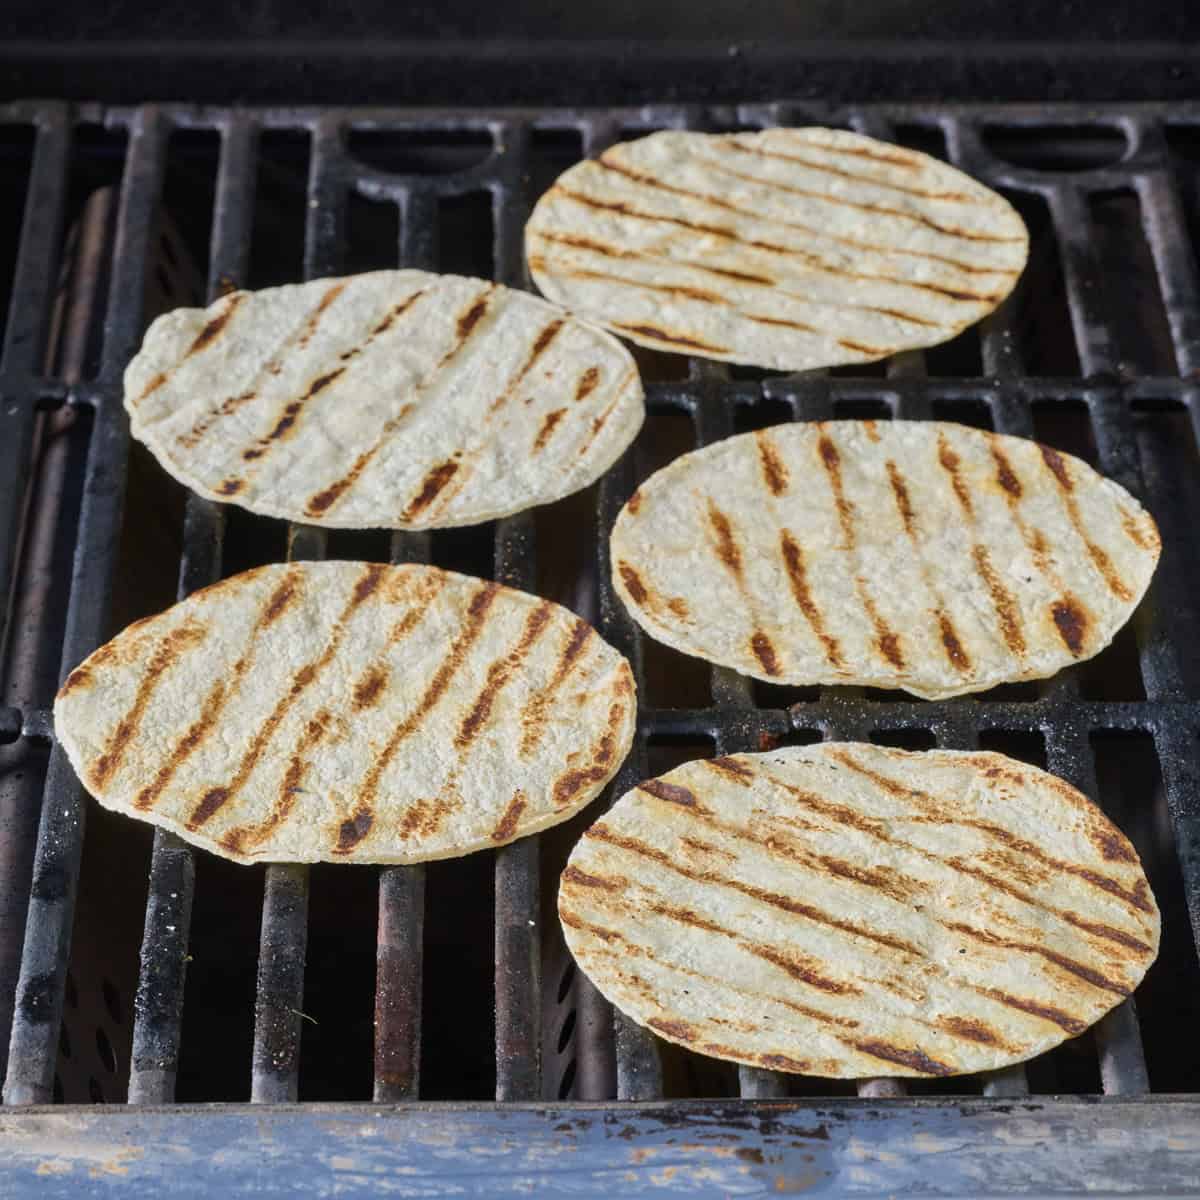 Five browned tortillas on a gas grill.